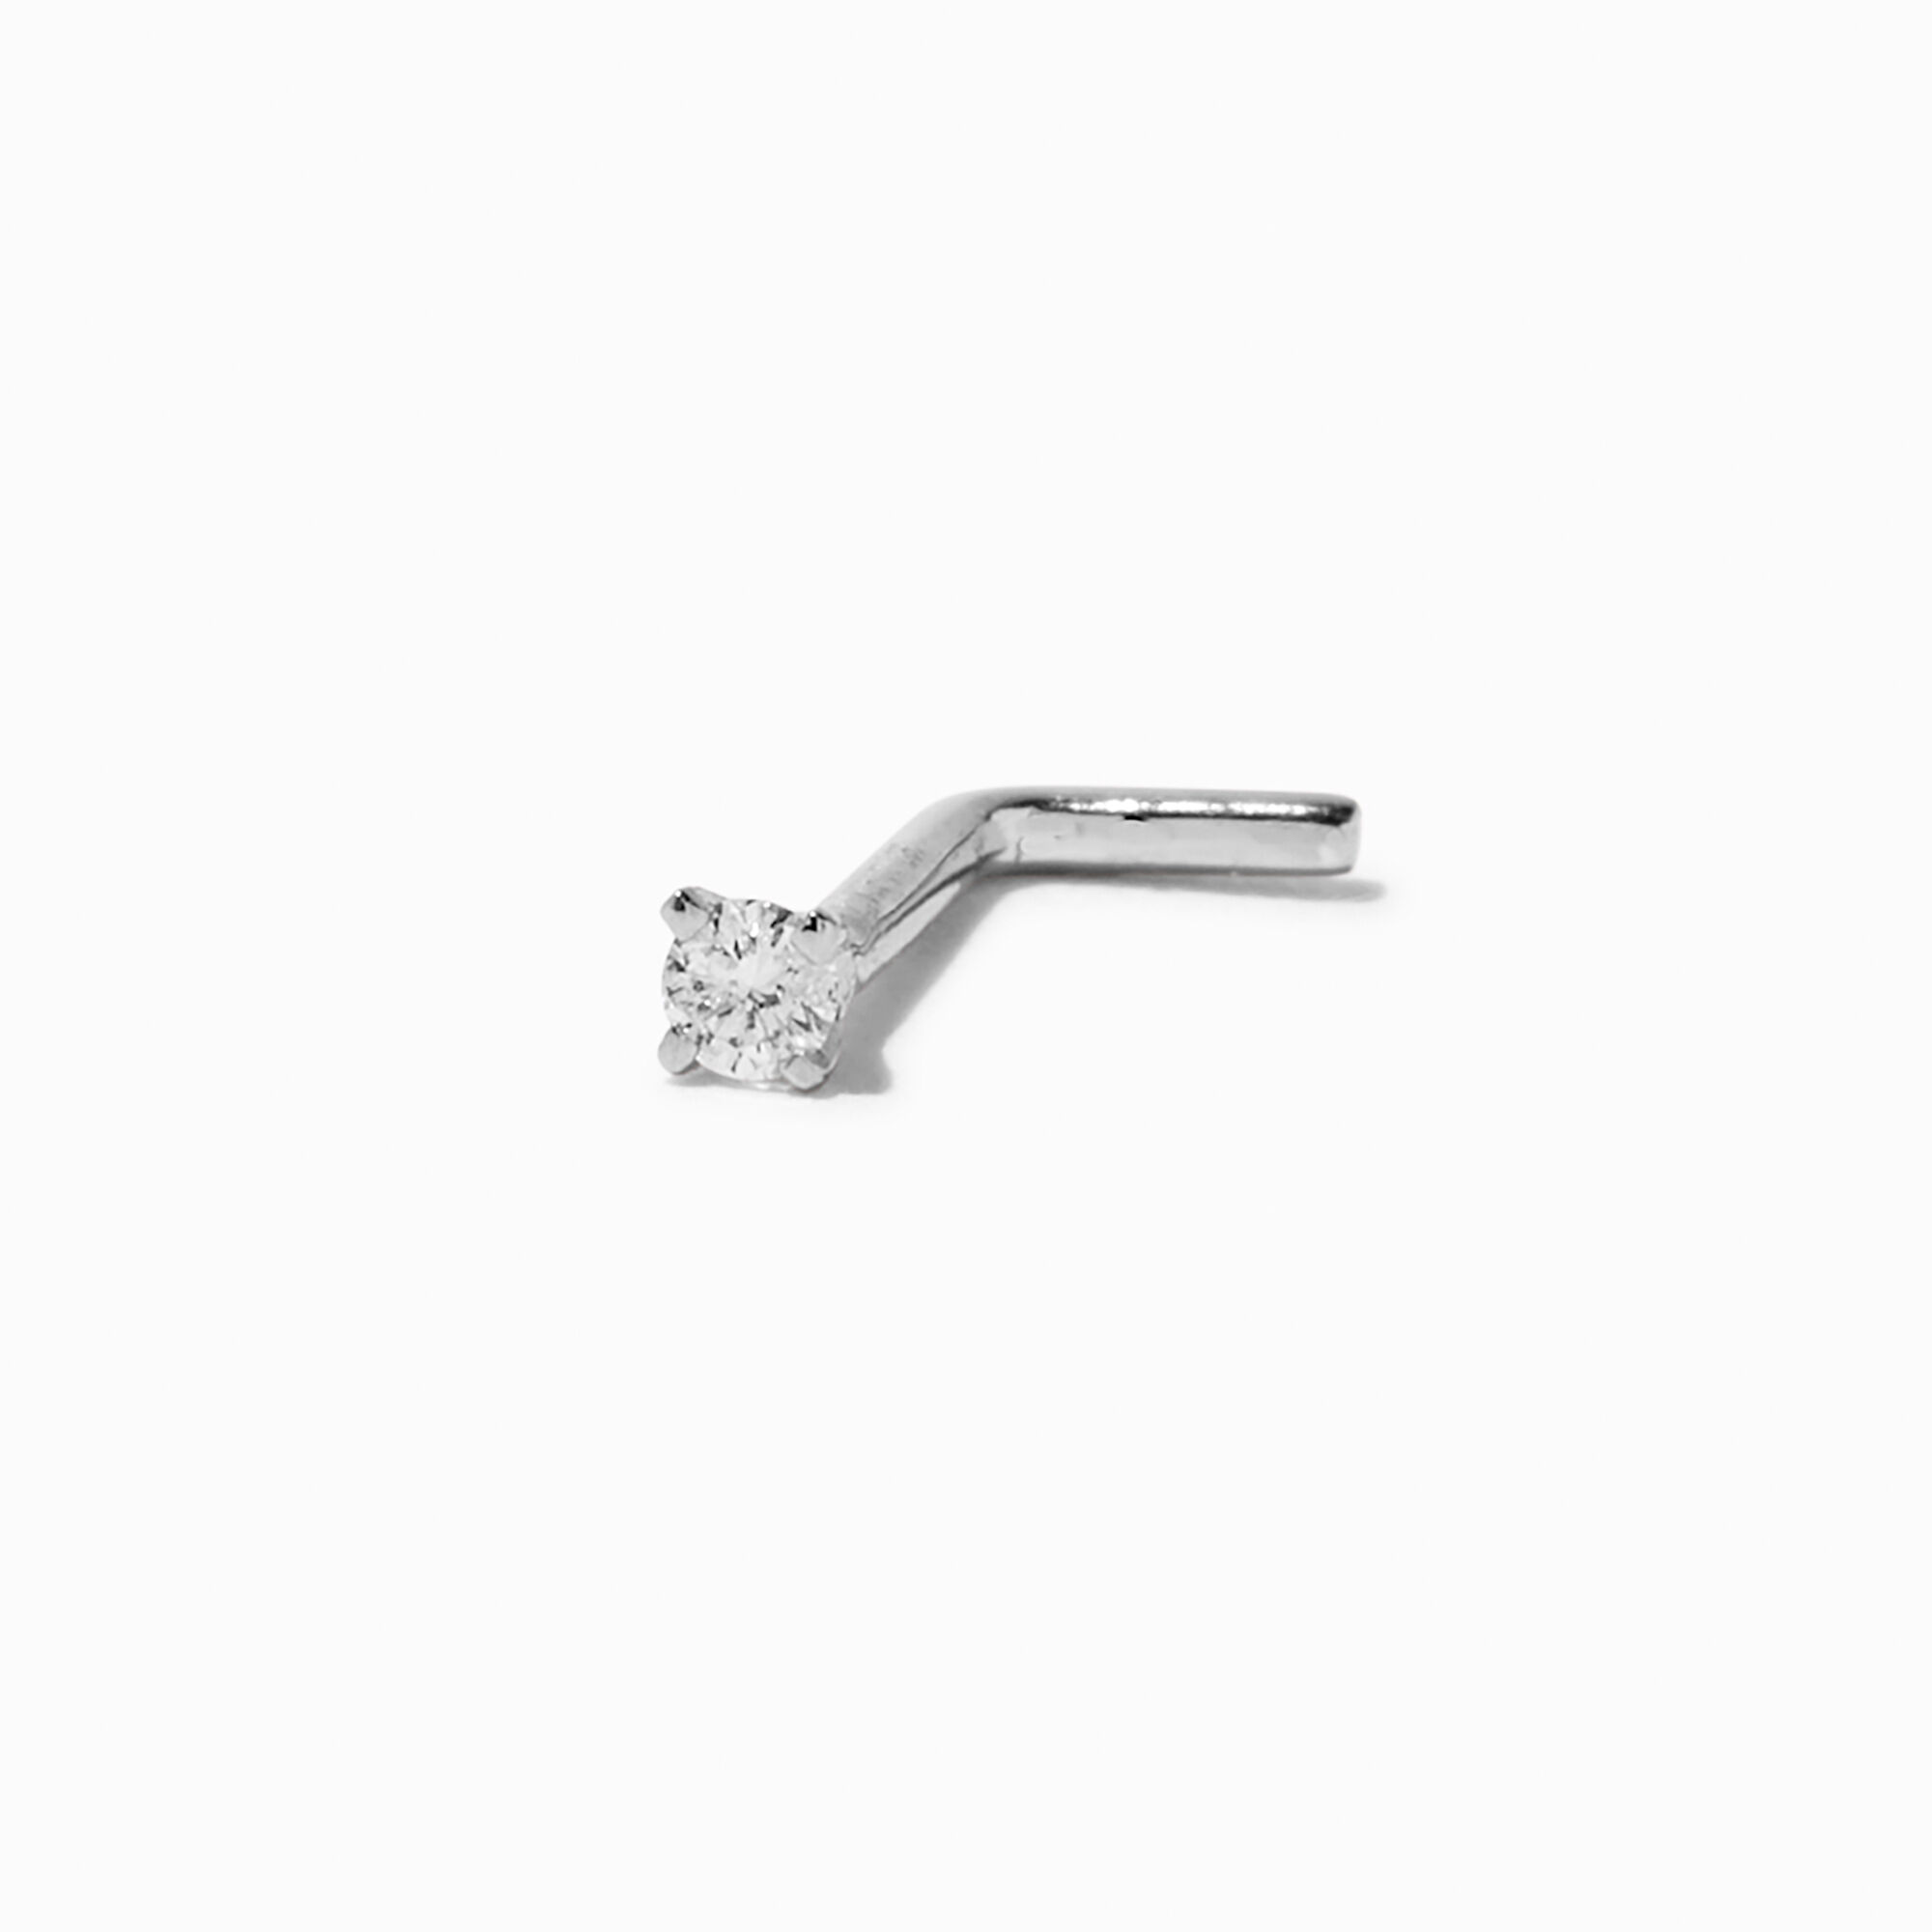 View C Luxe By Claires 003 Ct Tw Lab Grown Diamond 20G Nose Stud Silver information